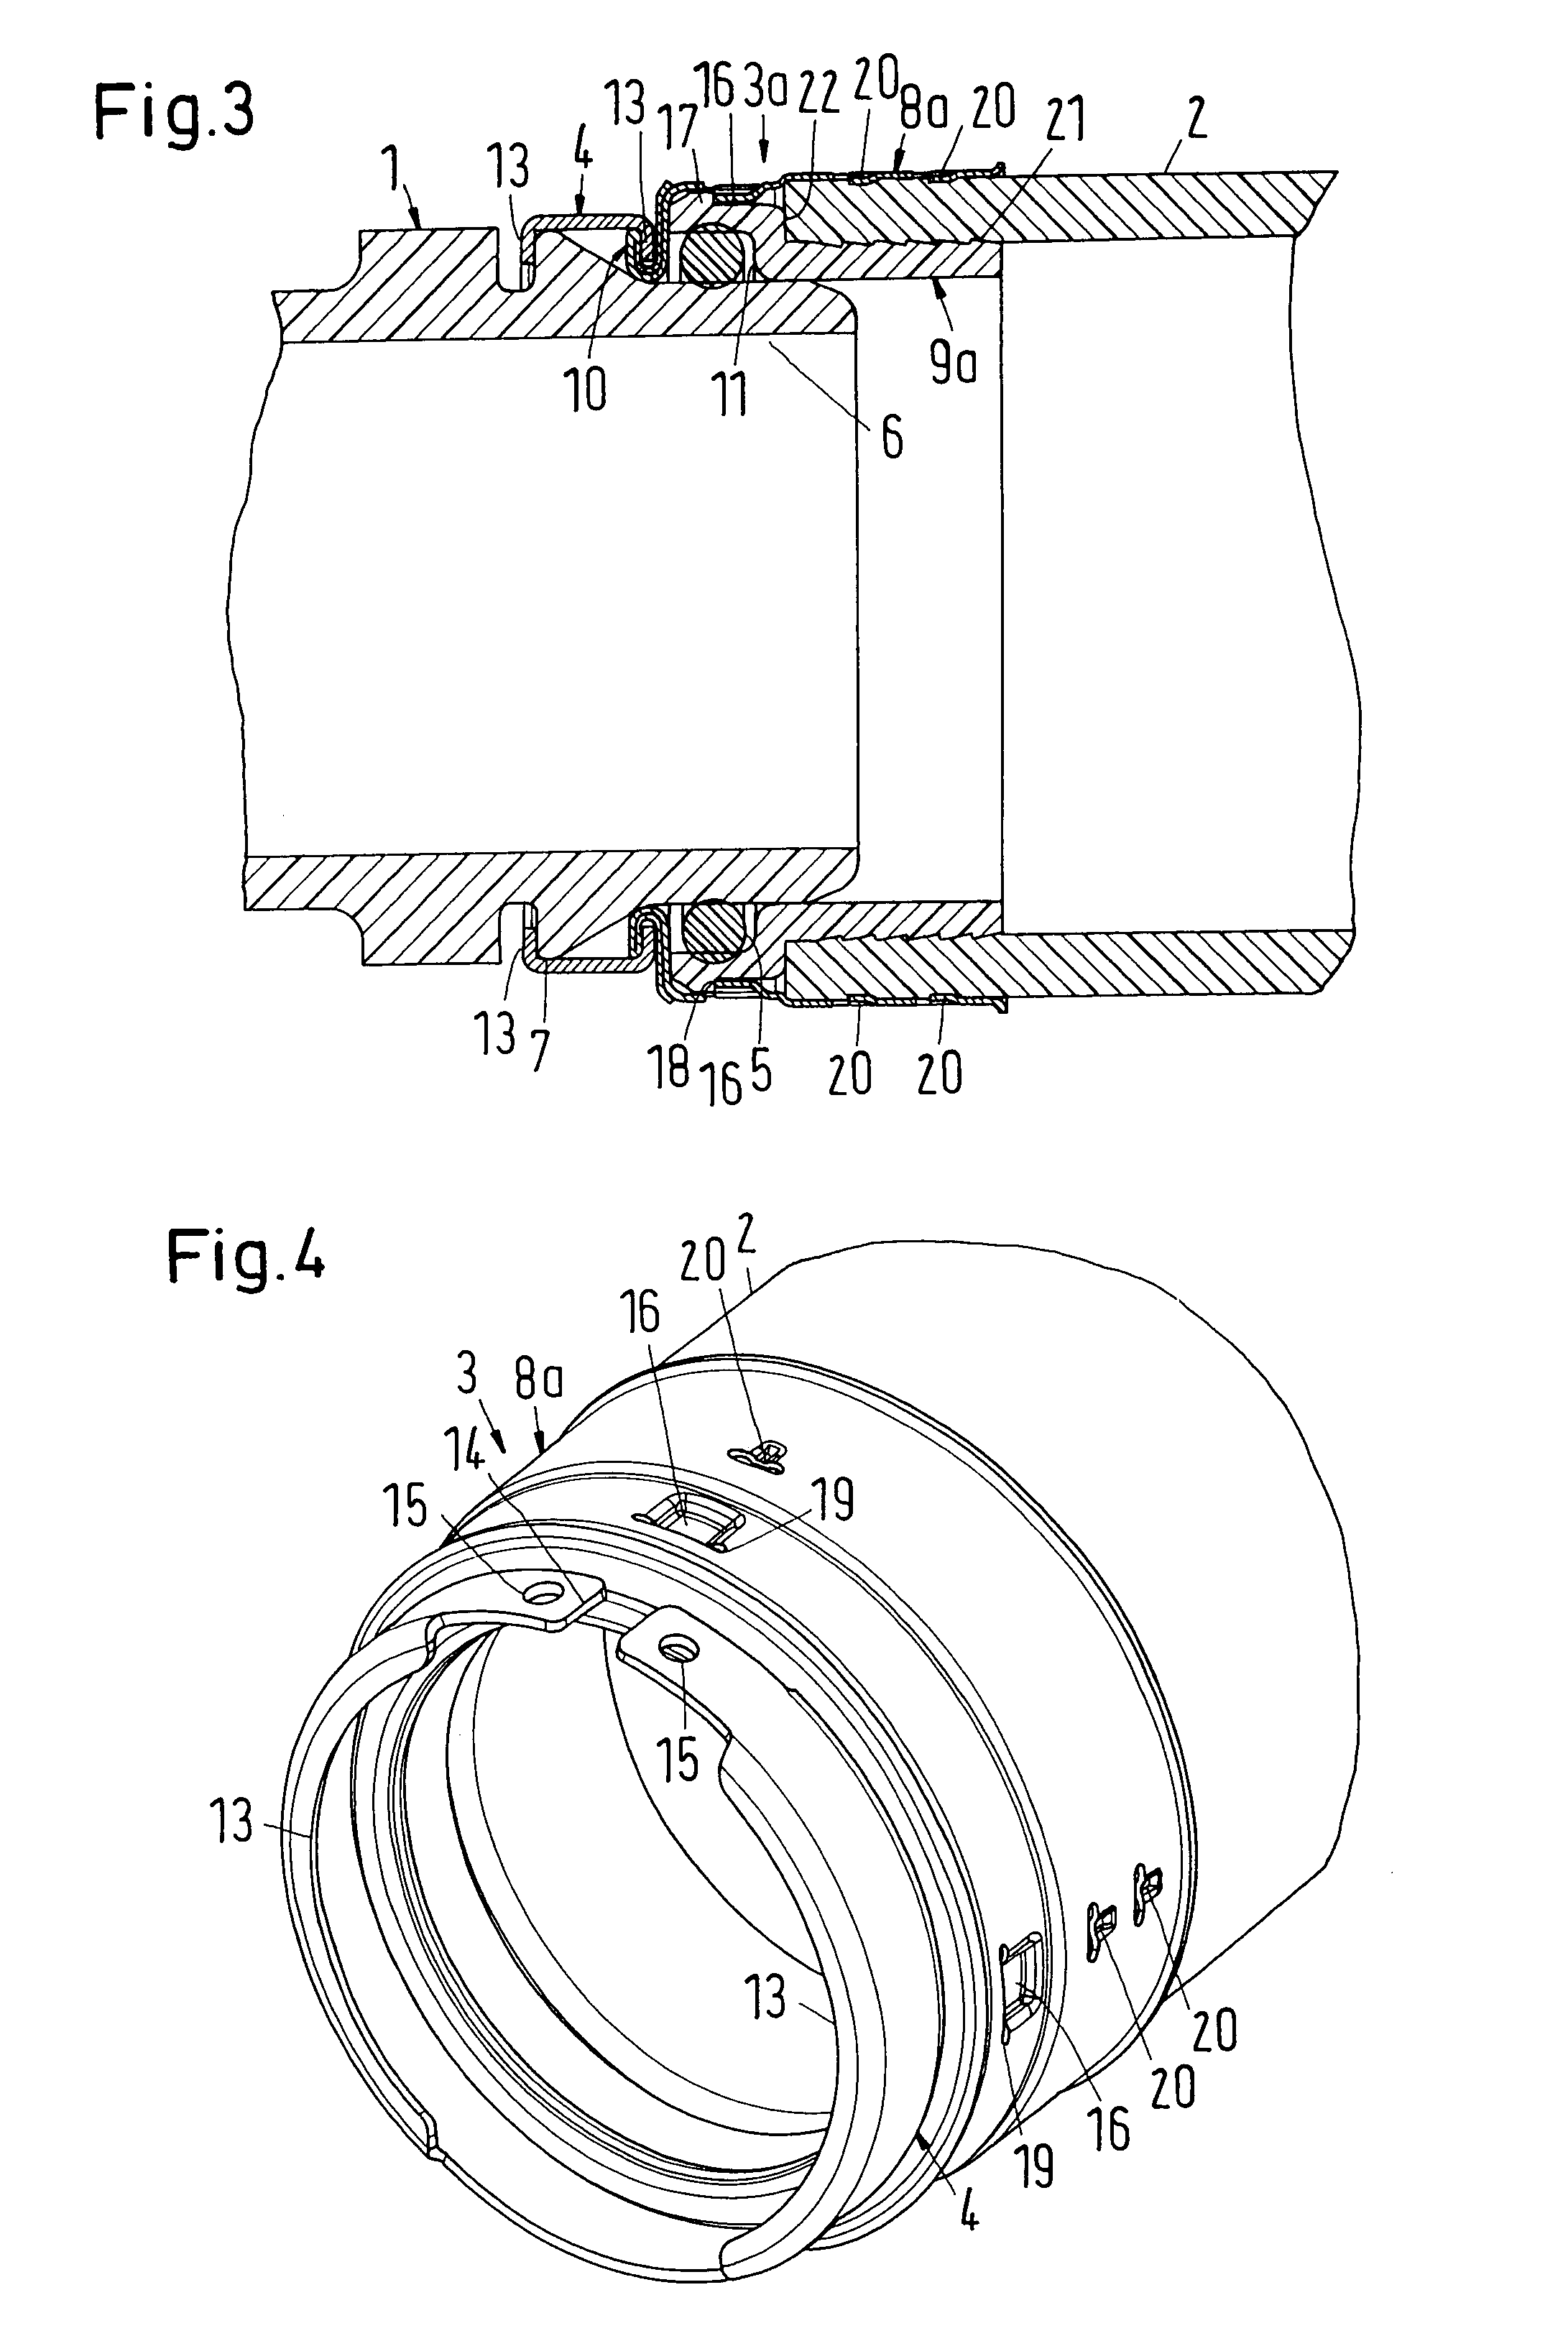 Plug-type connection arrangement for a hose and a pipe